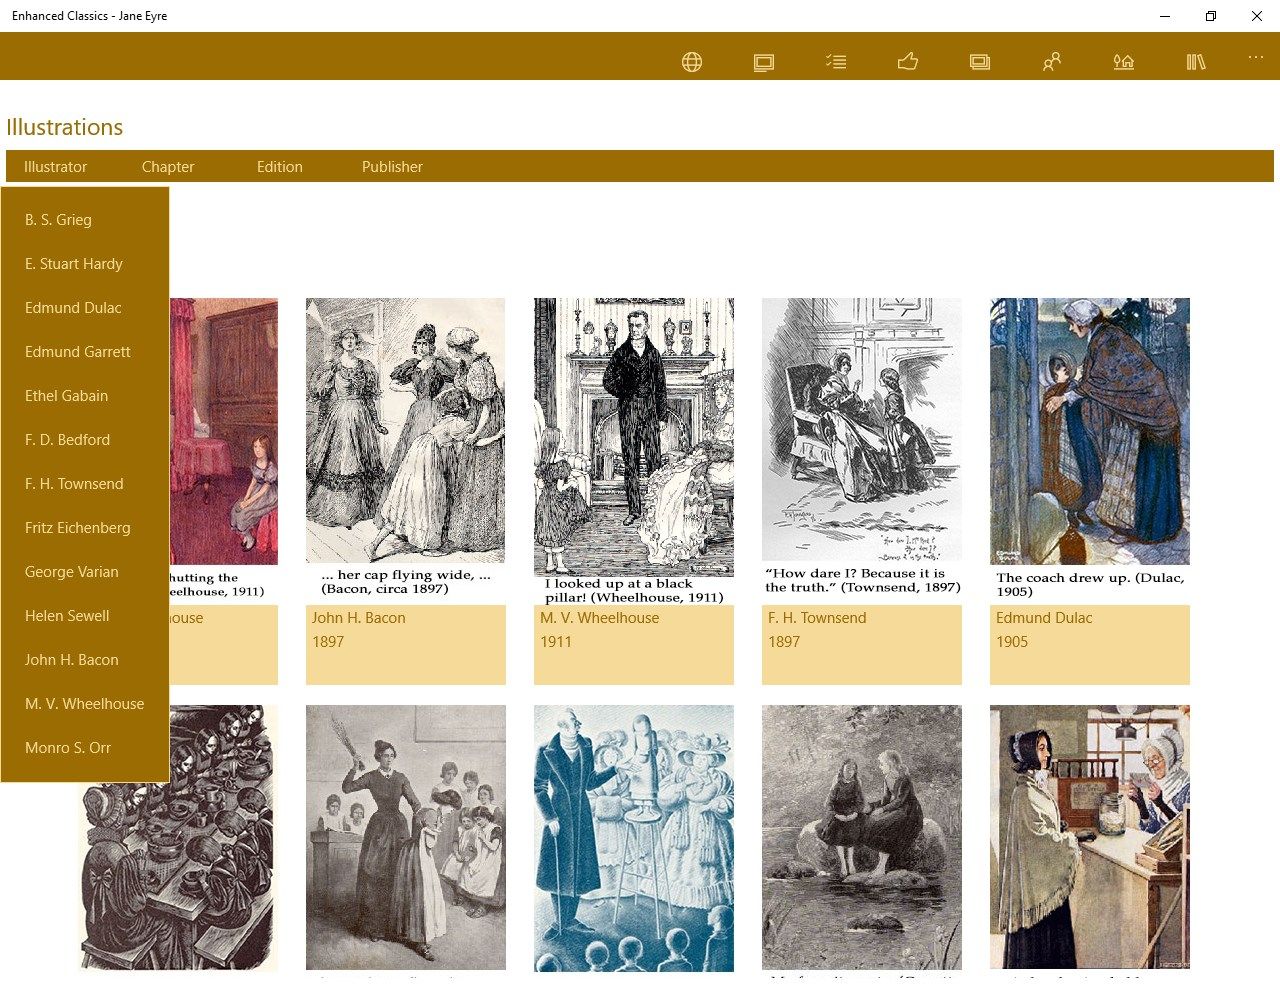 Media page lets you select and view illustrations and videos seen in this edition as well as additional content